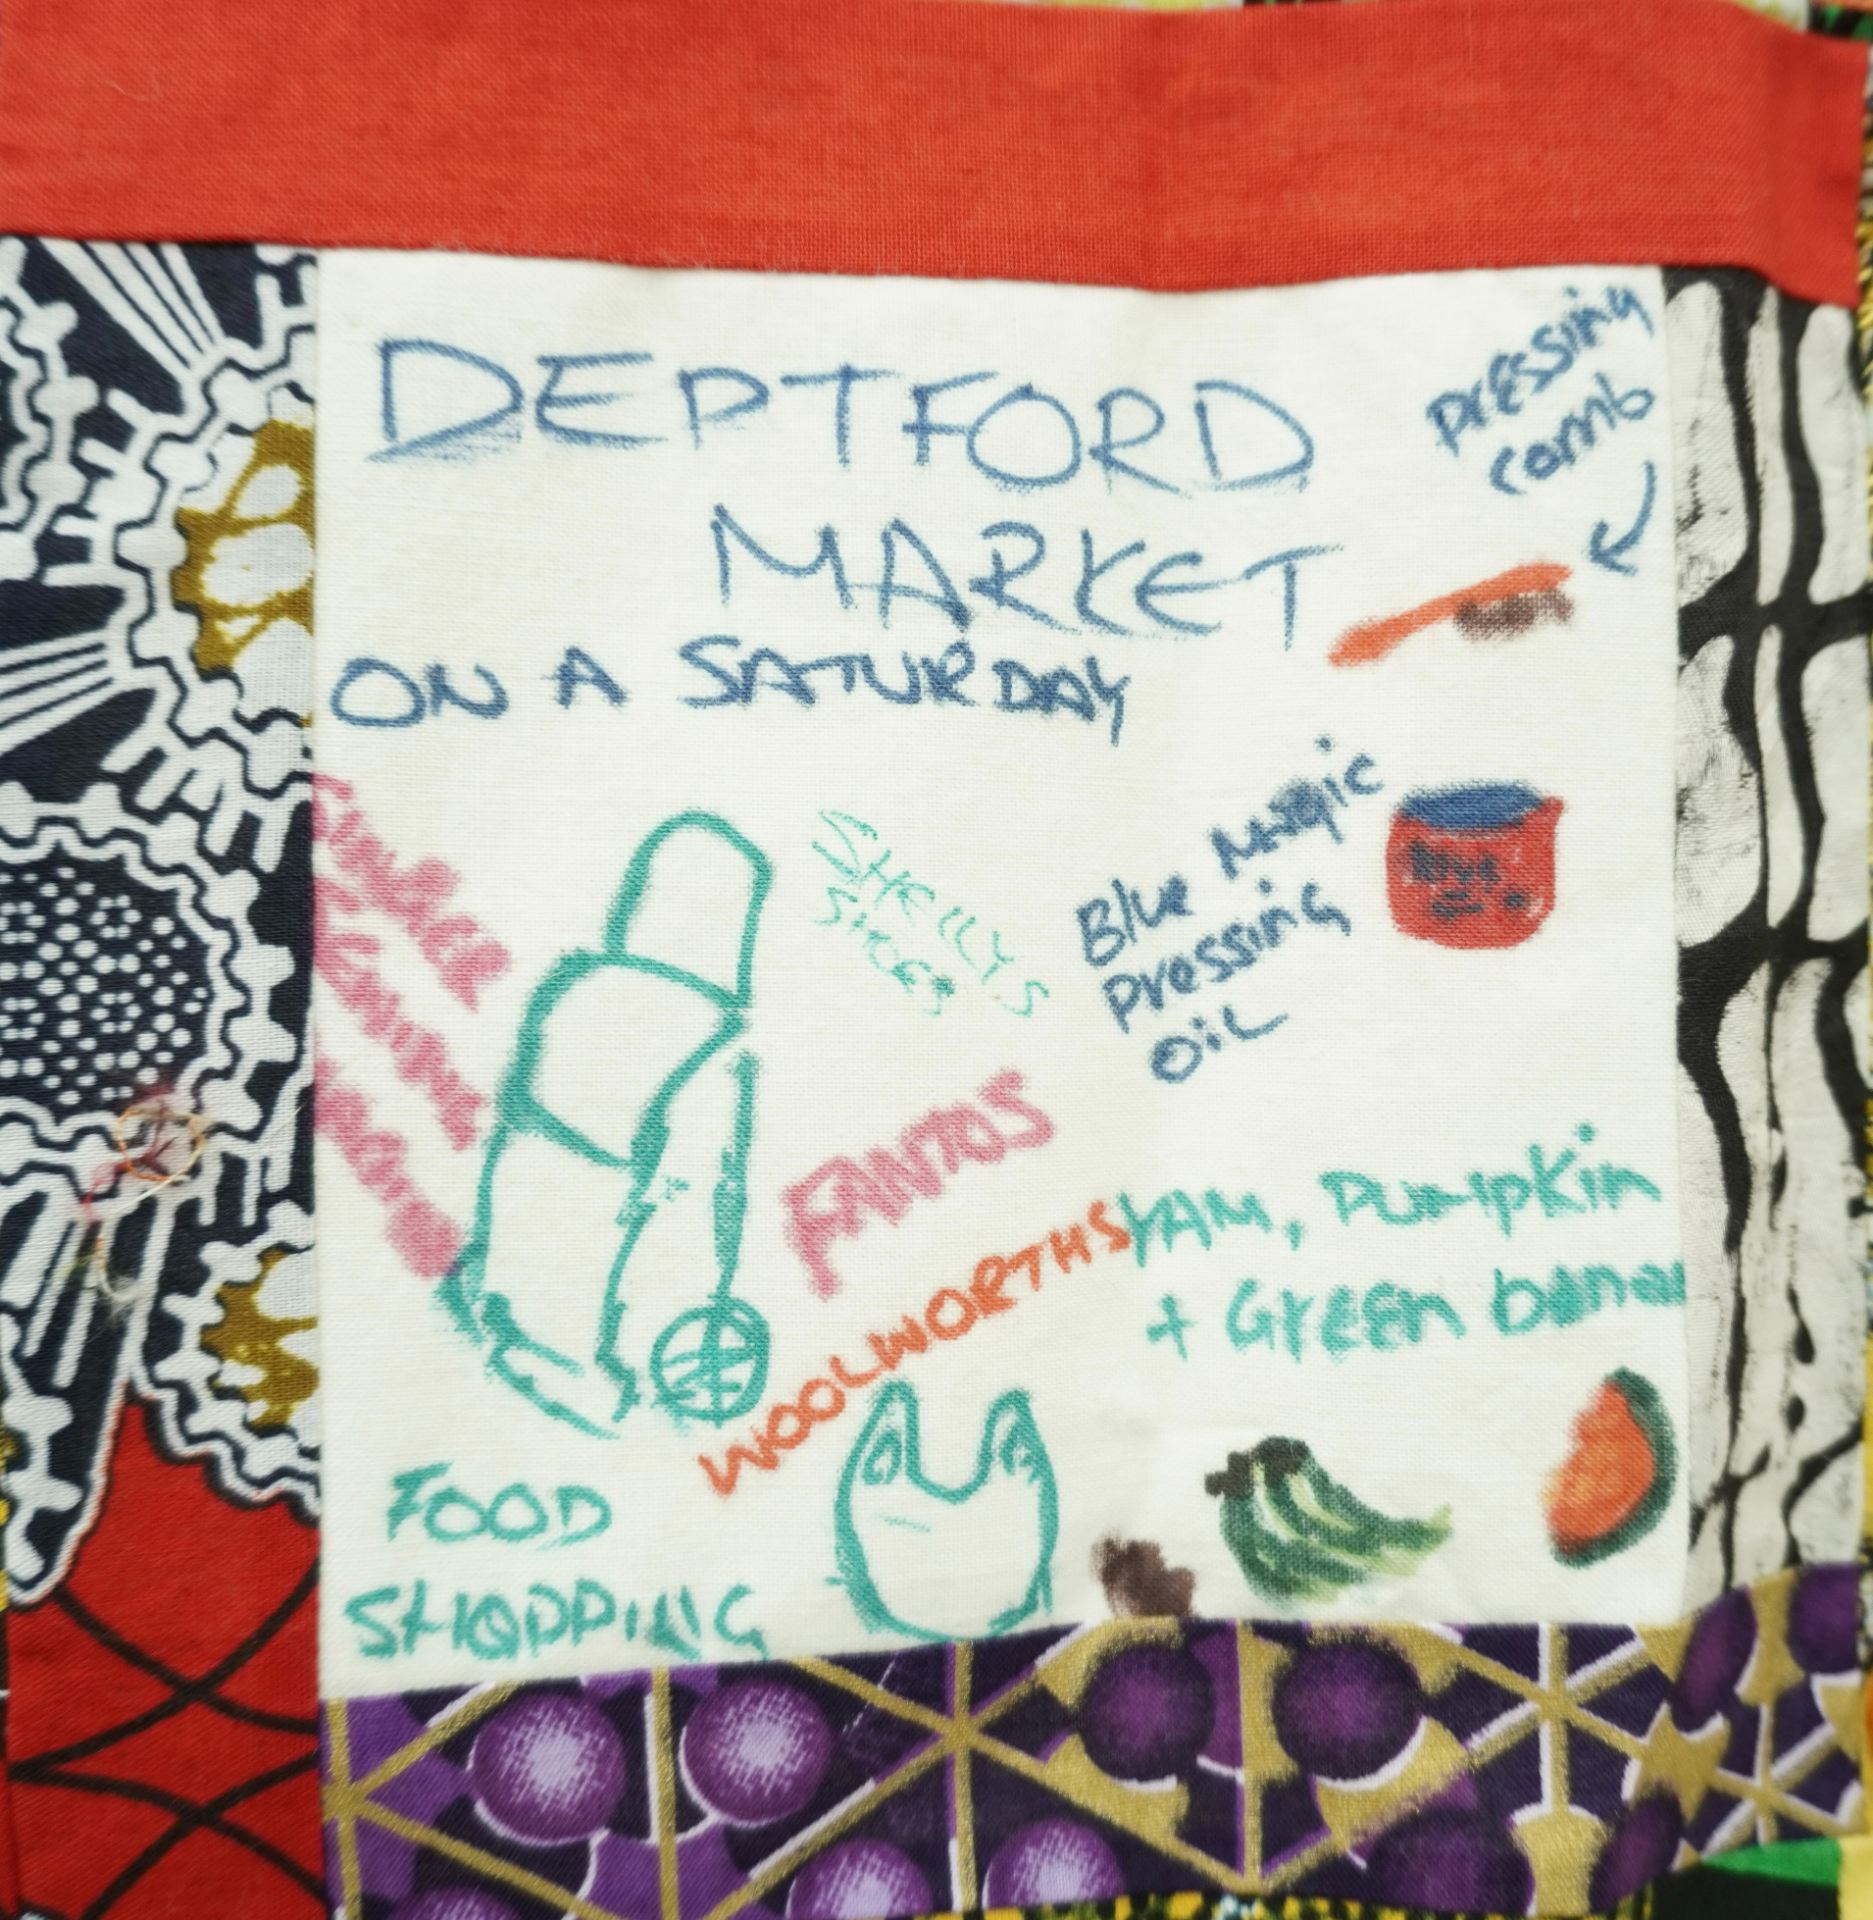 Commemorative quilt. Text reads, 'Deptford Market on a Saturday, blue magic pressing oil, yam, pumpkin and green banana, food shopping, Woolworths, Fantos, Singer sewing machine'